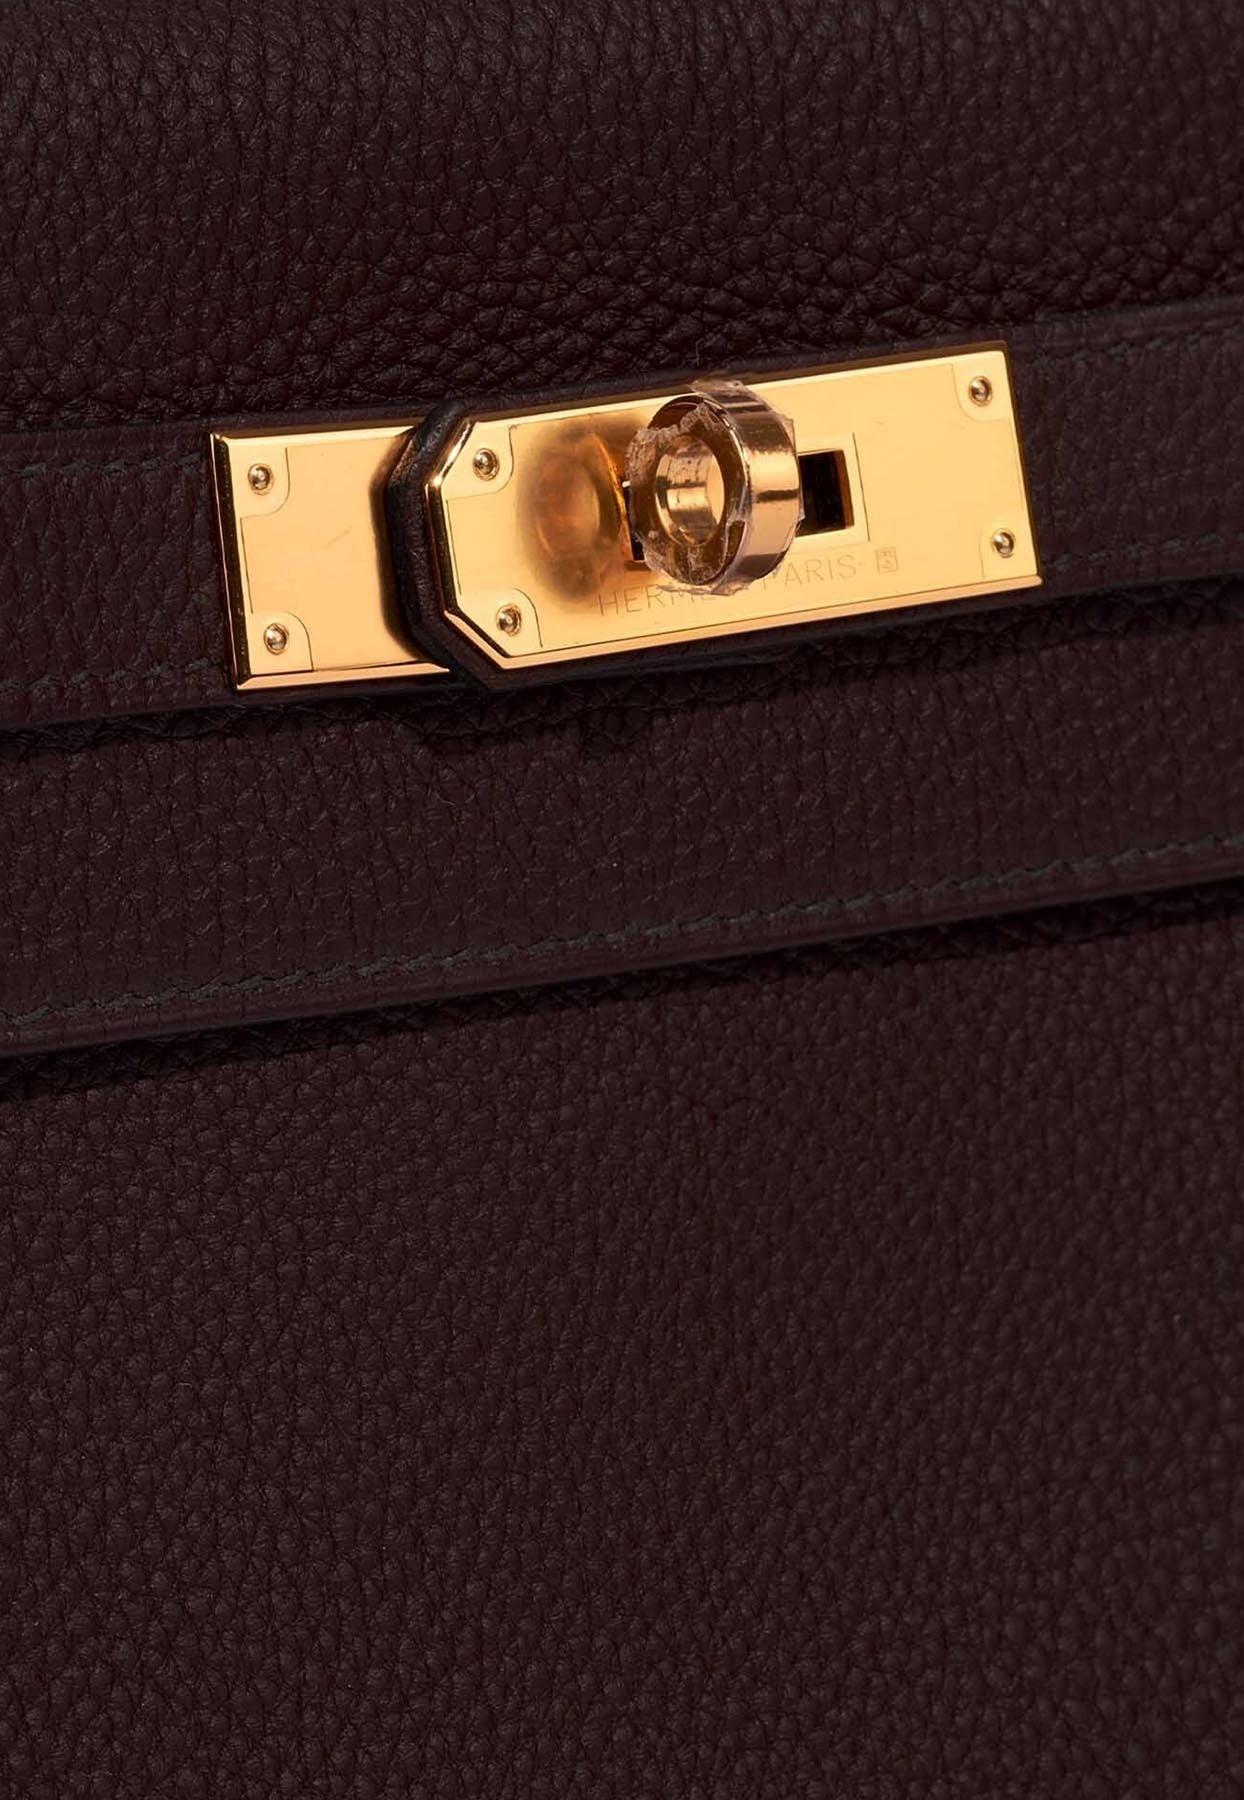 Hermès Kelly 28 Rouge H Sellier Sombrero Gold Hardware GHW — The